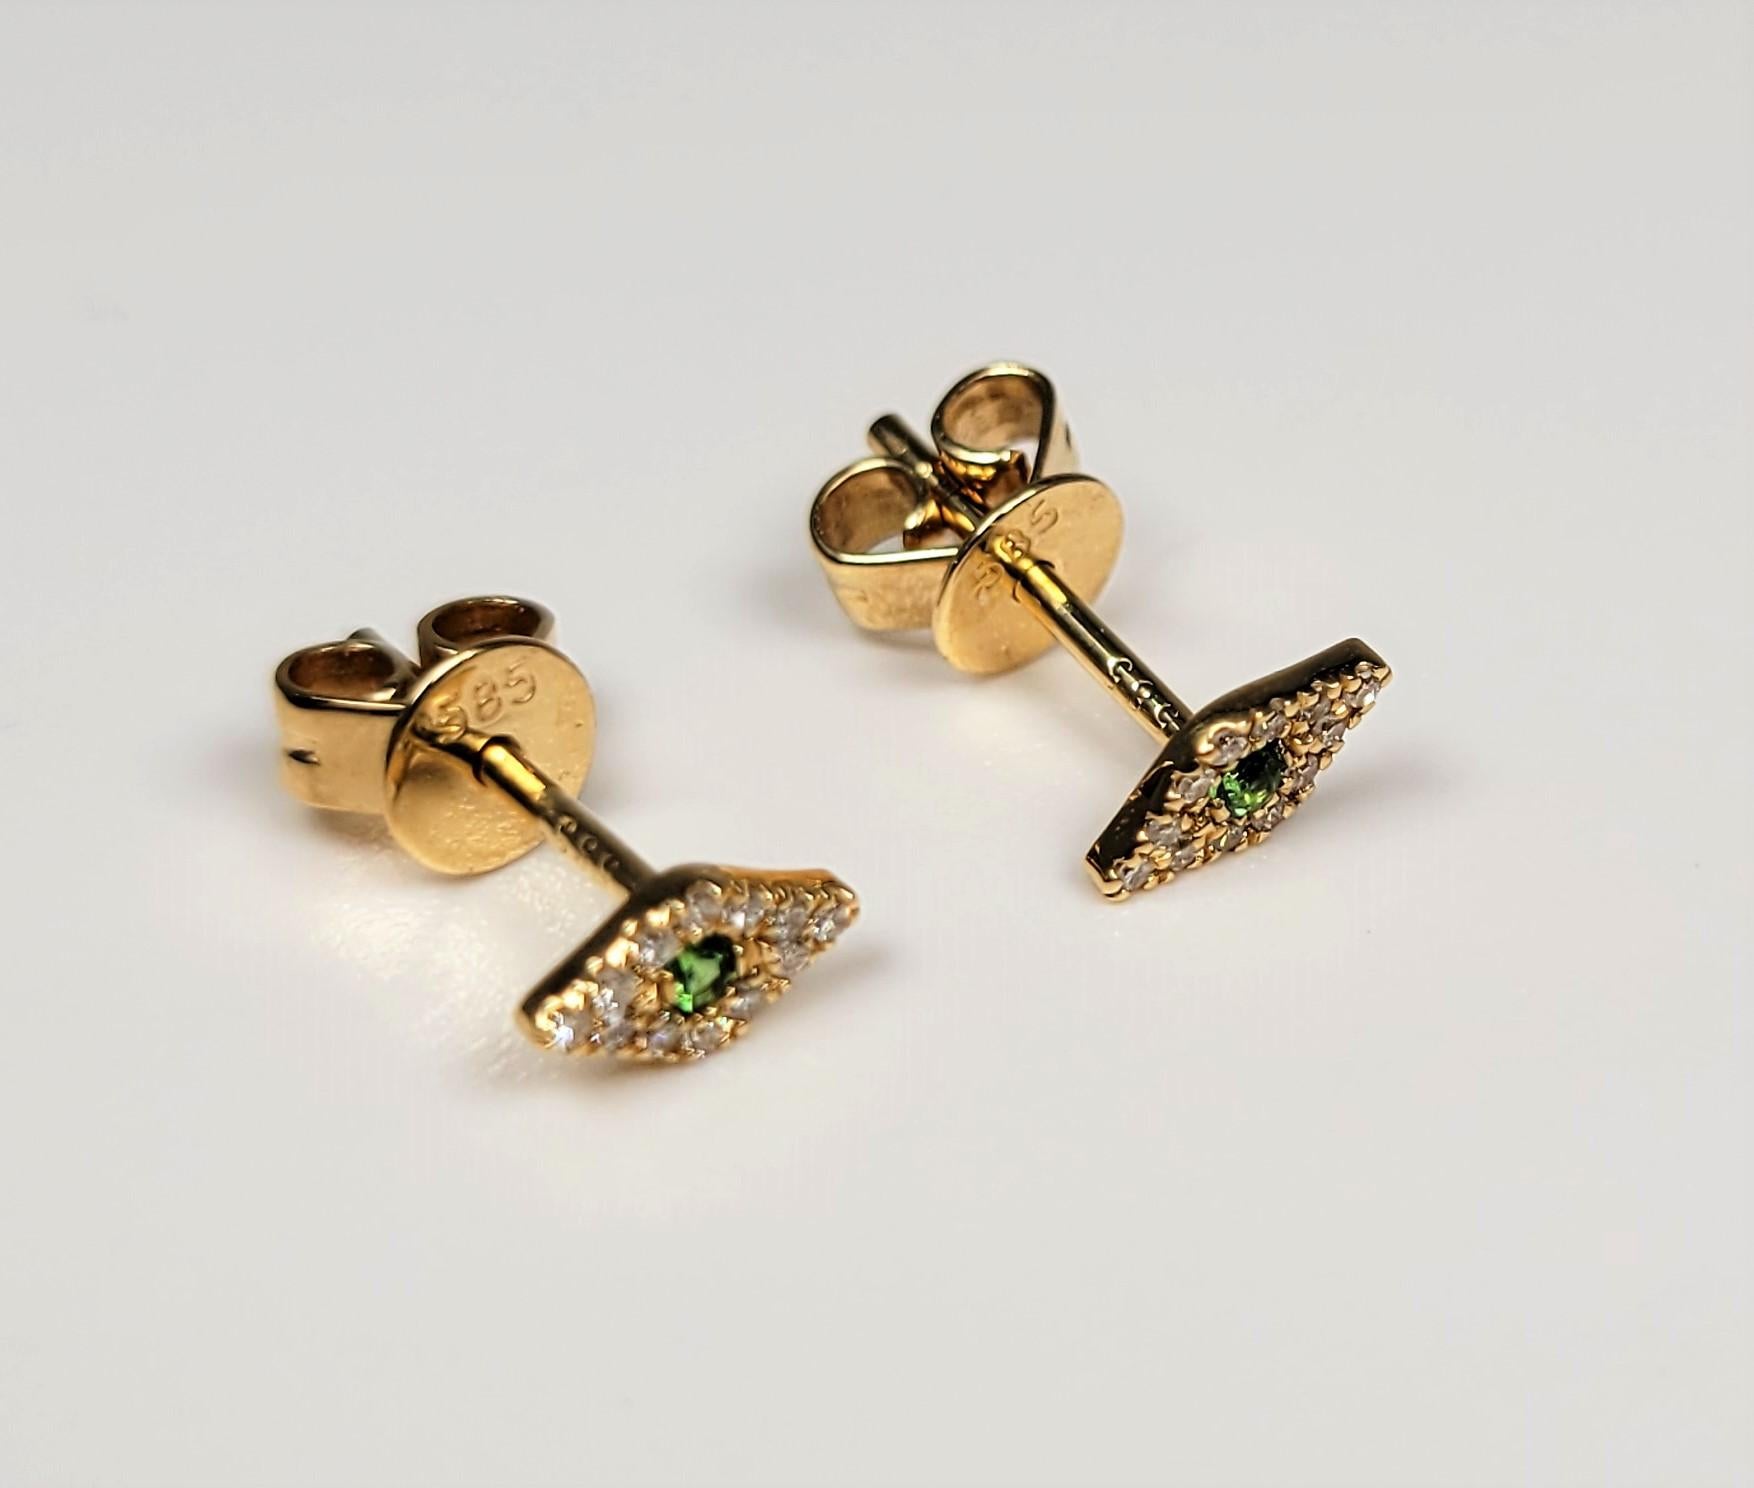 Composed of 14 karat yellow gold these tsavorite and diamond earrings are fun and light! 